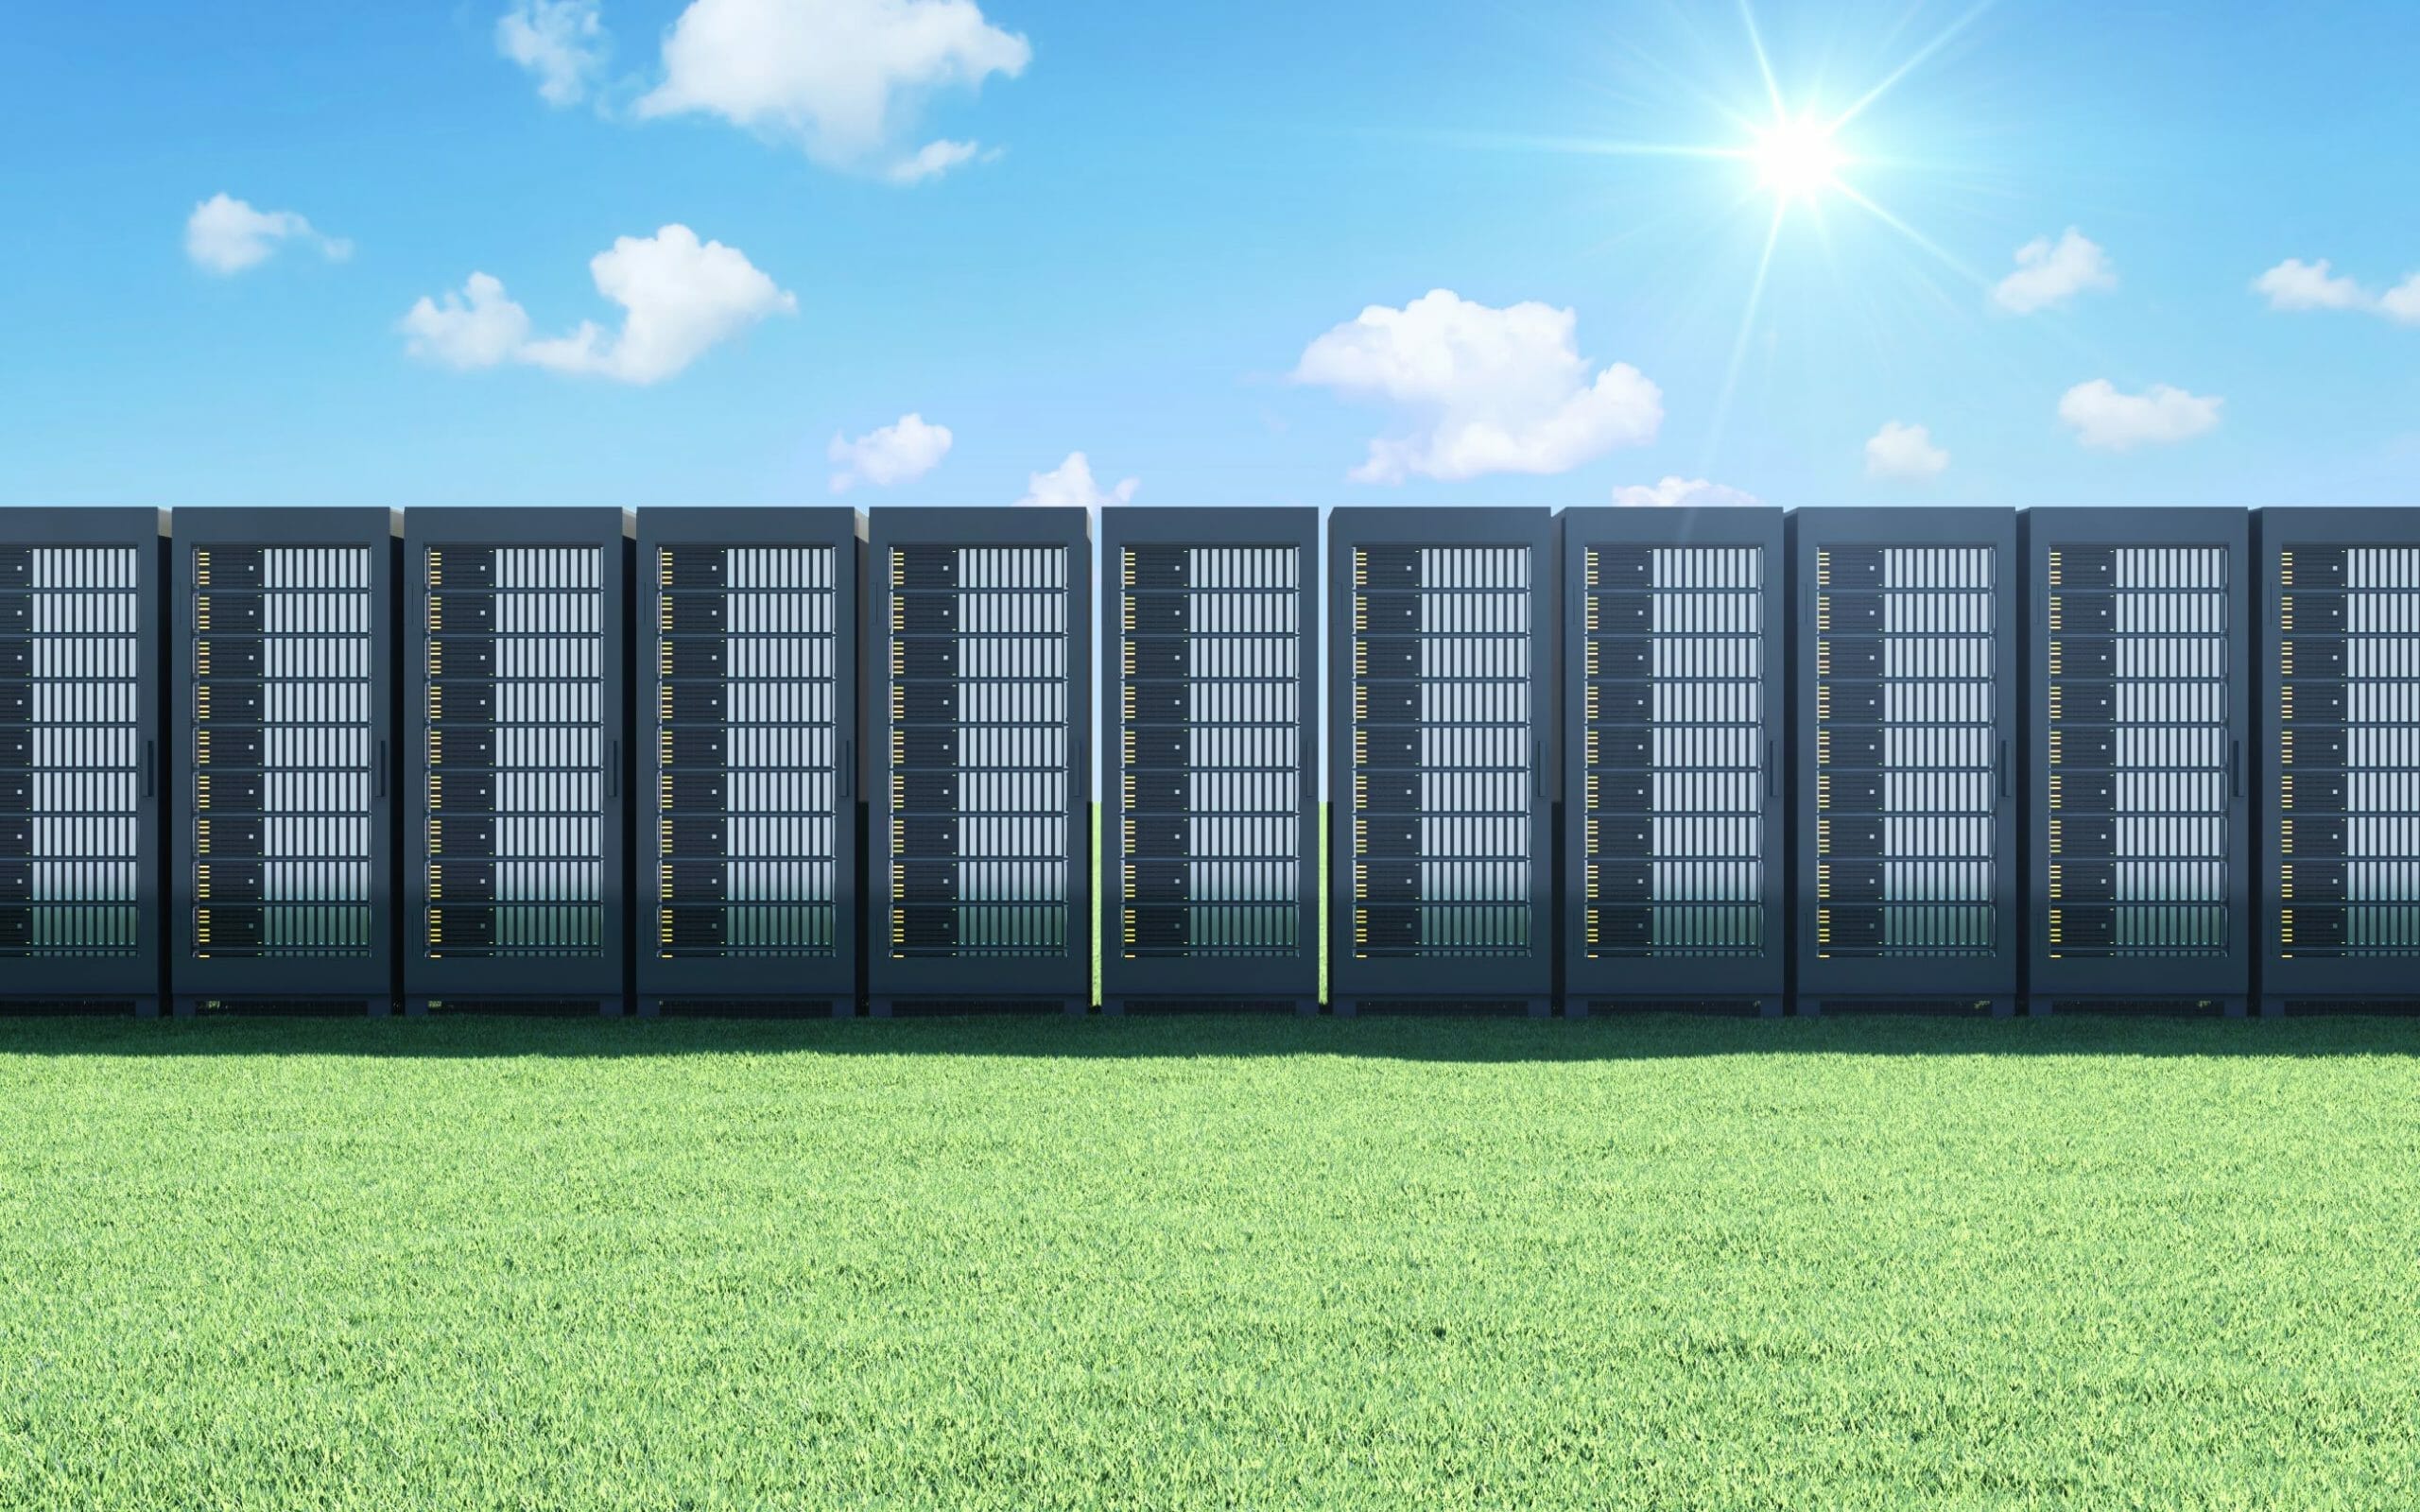 Can Data Centers Take Control of Clean Energy?